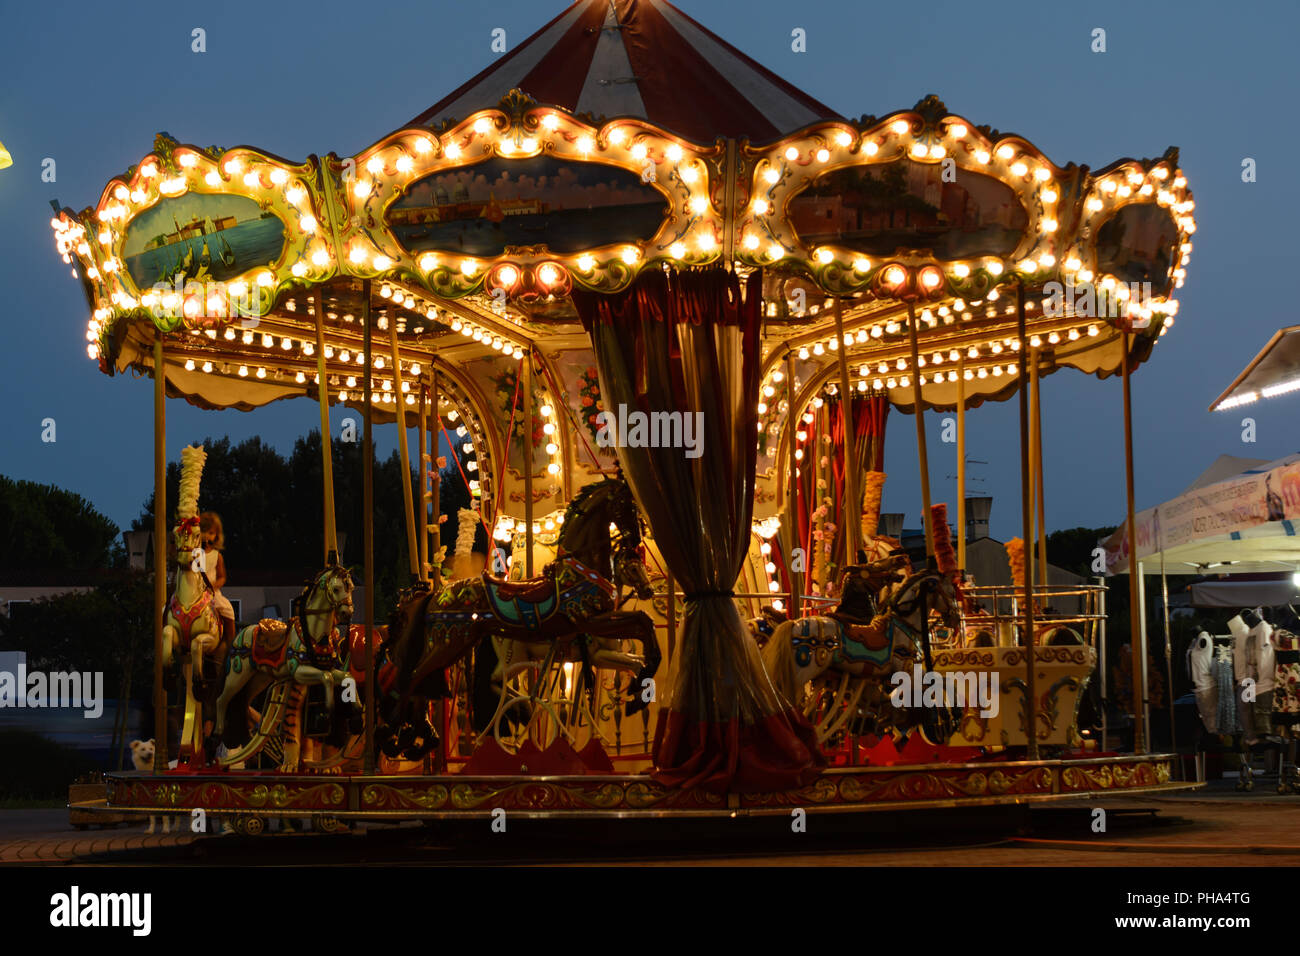 Illuminated ring game in the evening - carrousel Stock Photo